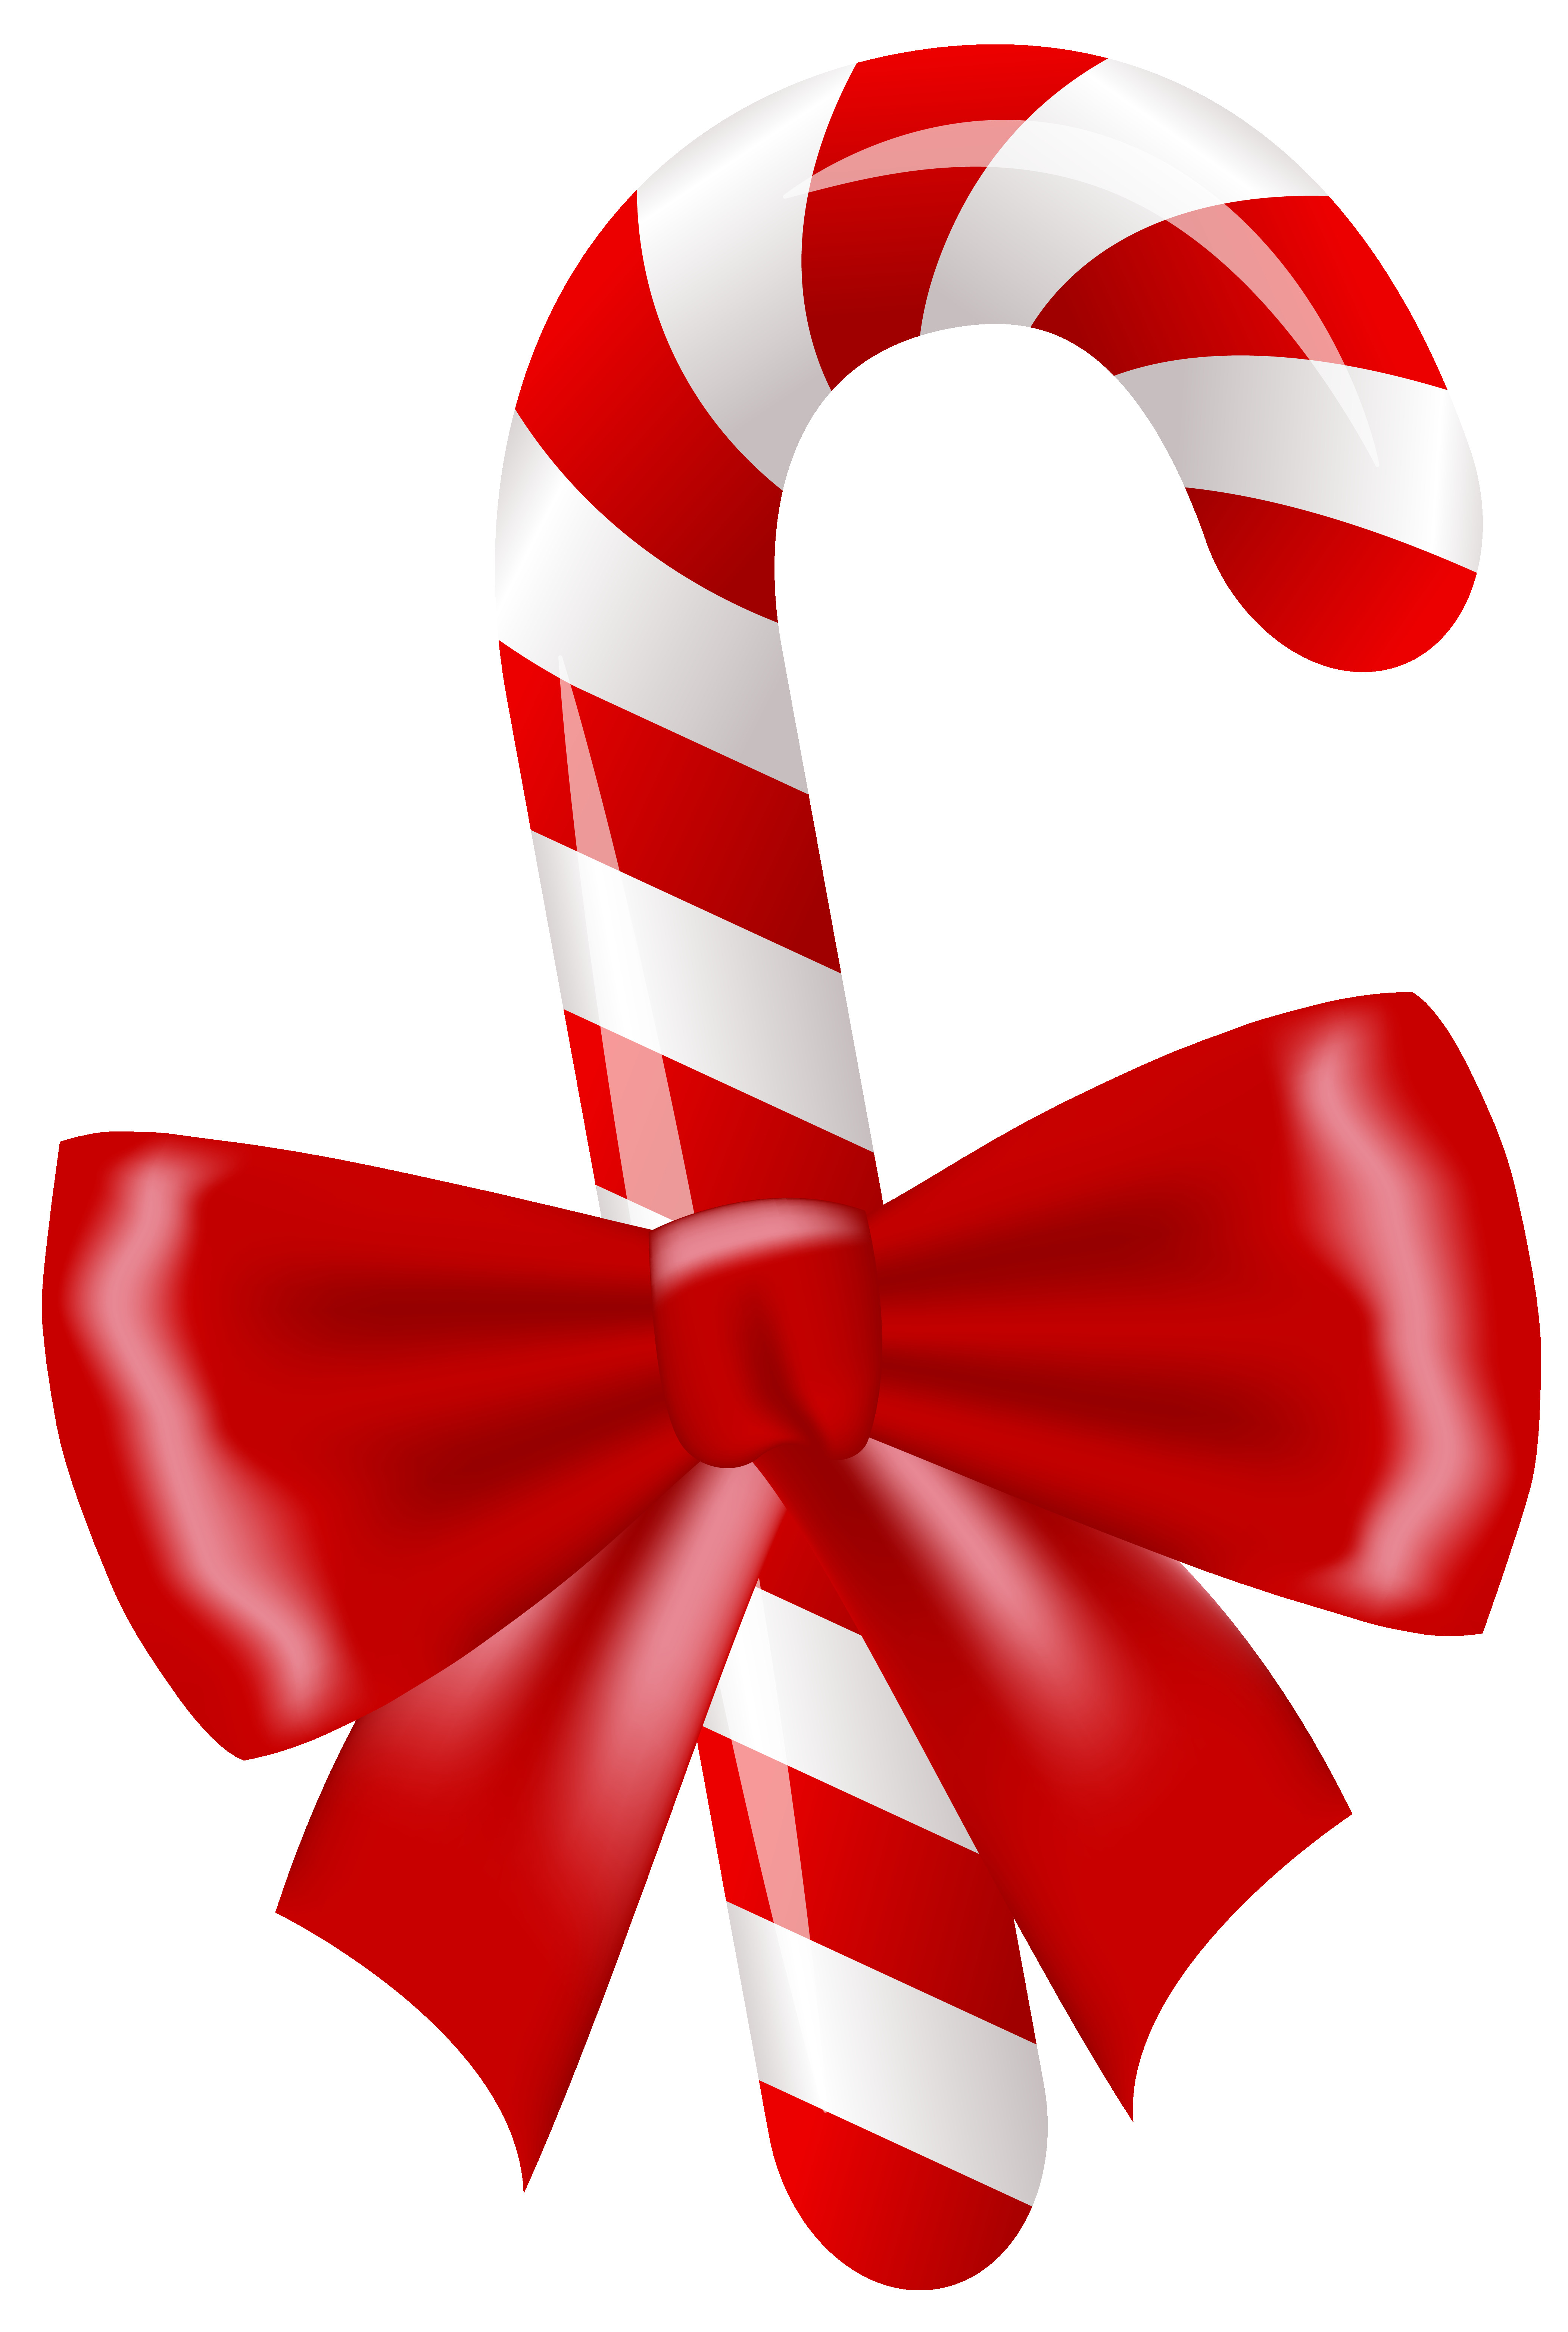 Christmas Candy Image
 Christmas candy PNG